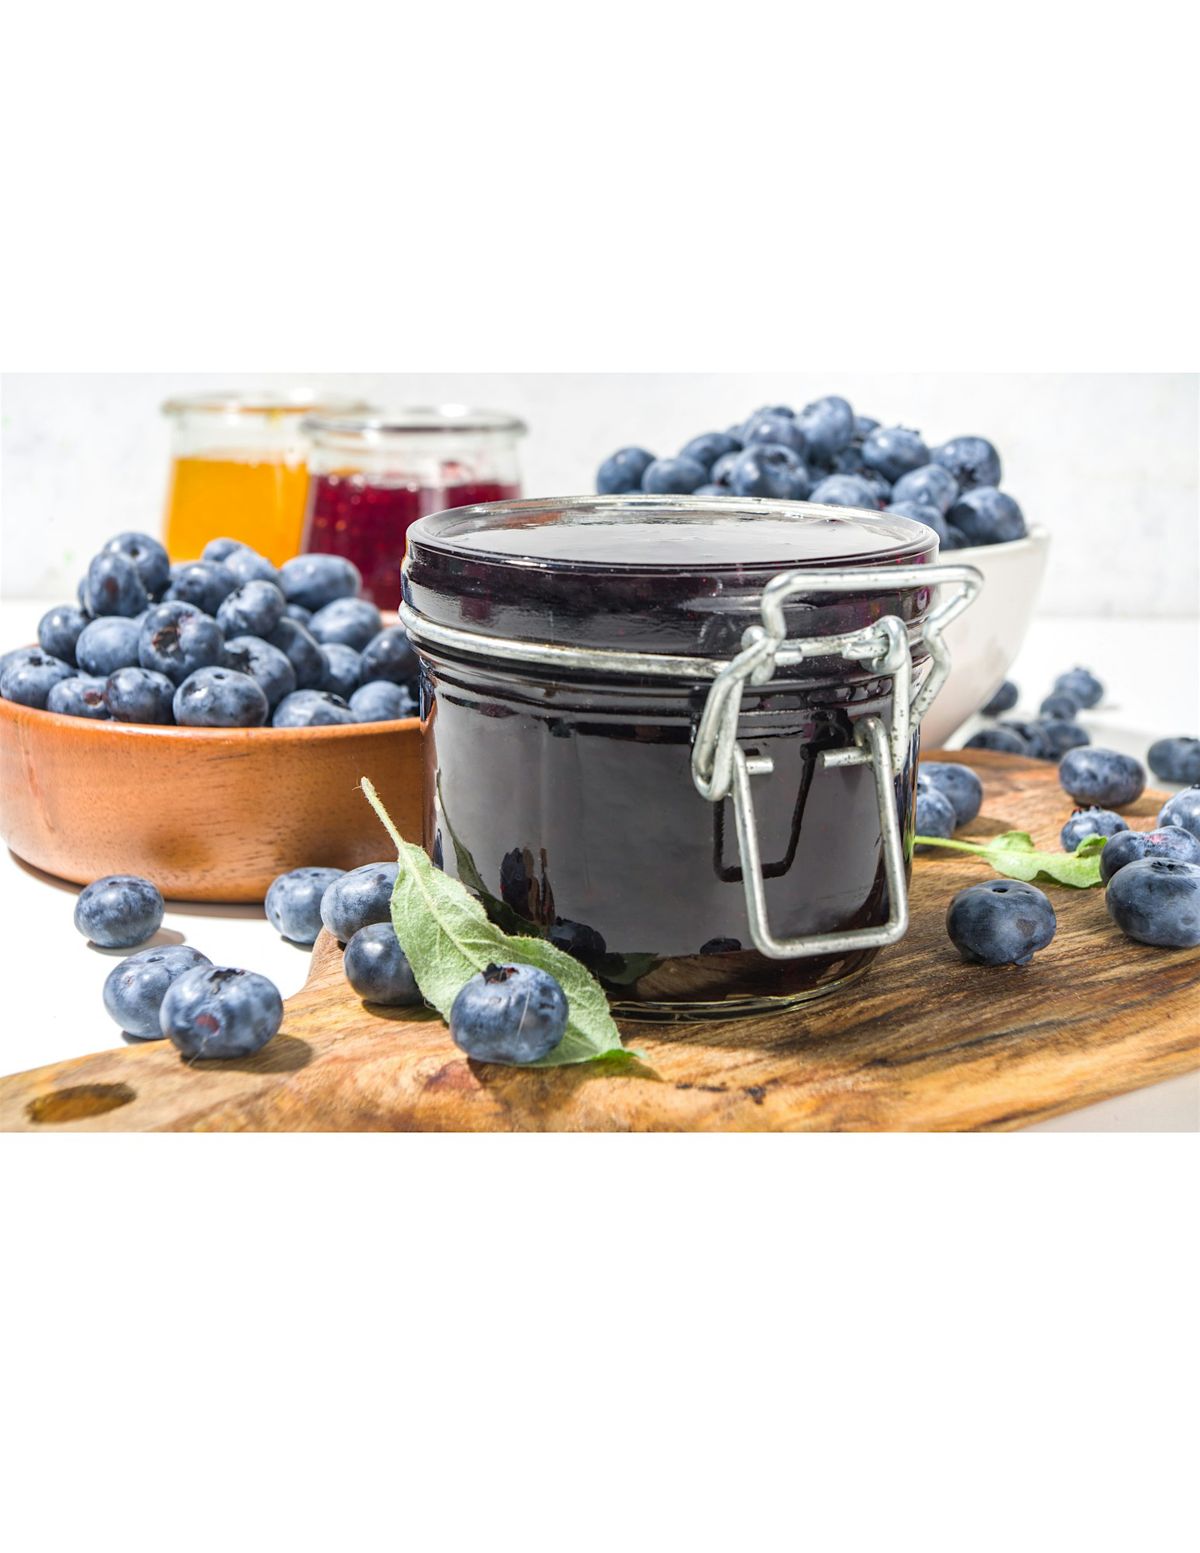 Water Bath Canning: Jams and Jellies - In person Class